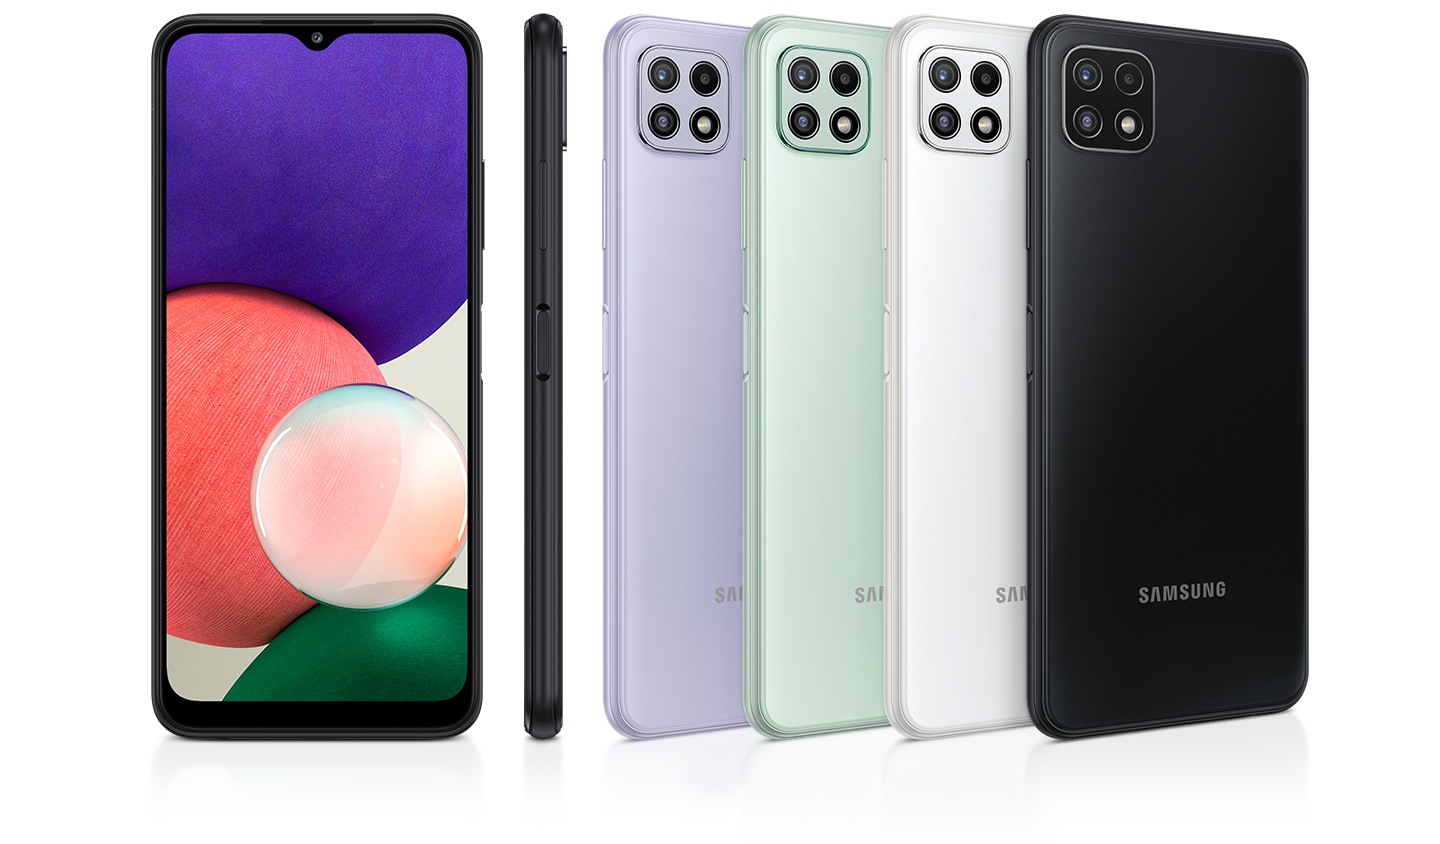 There is a glossy back view of 4 smartphones in gray, white, mint, and violet, along with a profile and front view highlighting the premium gloss finish.